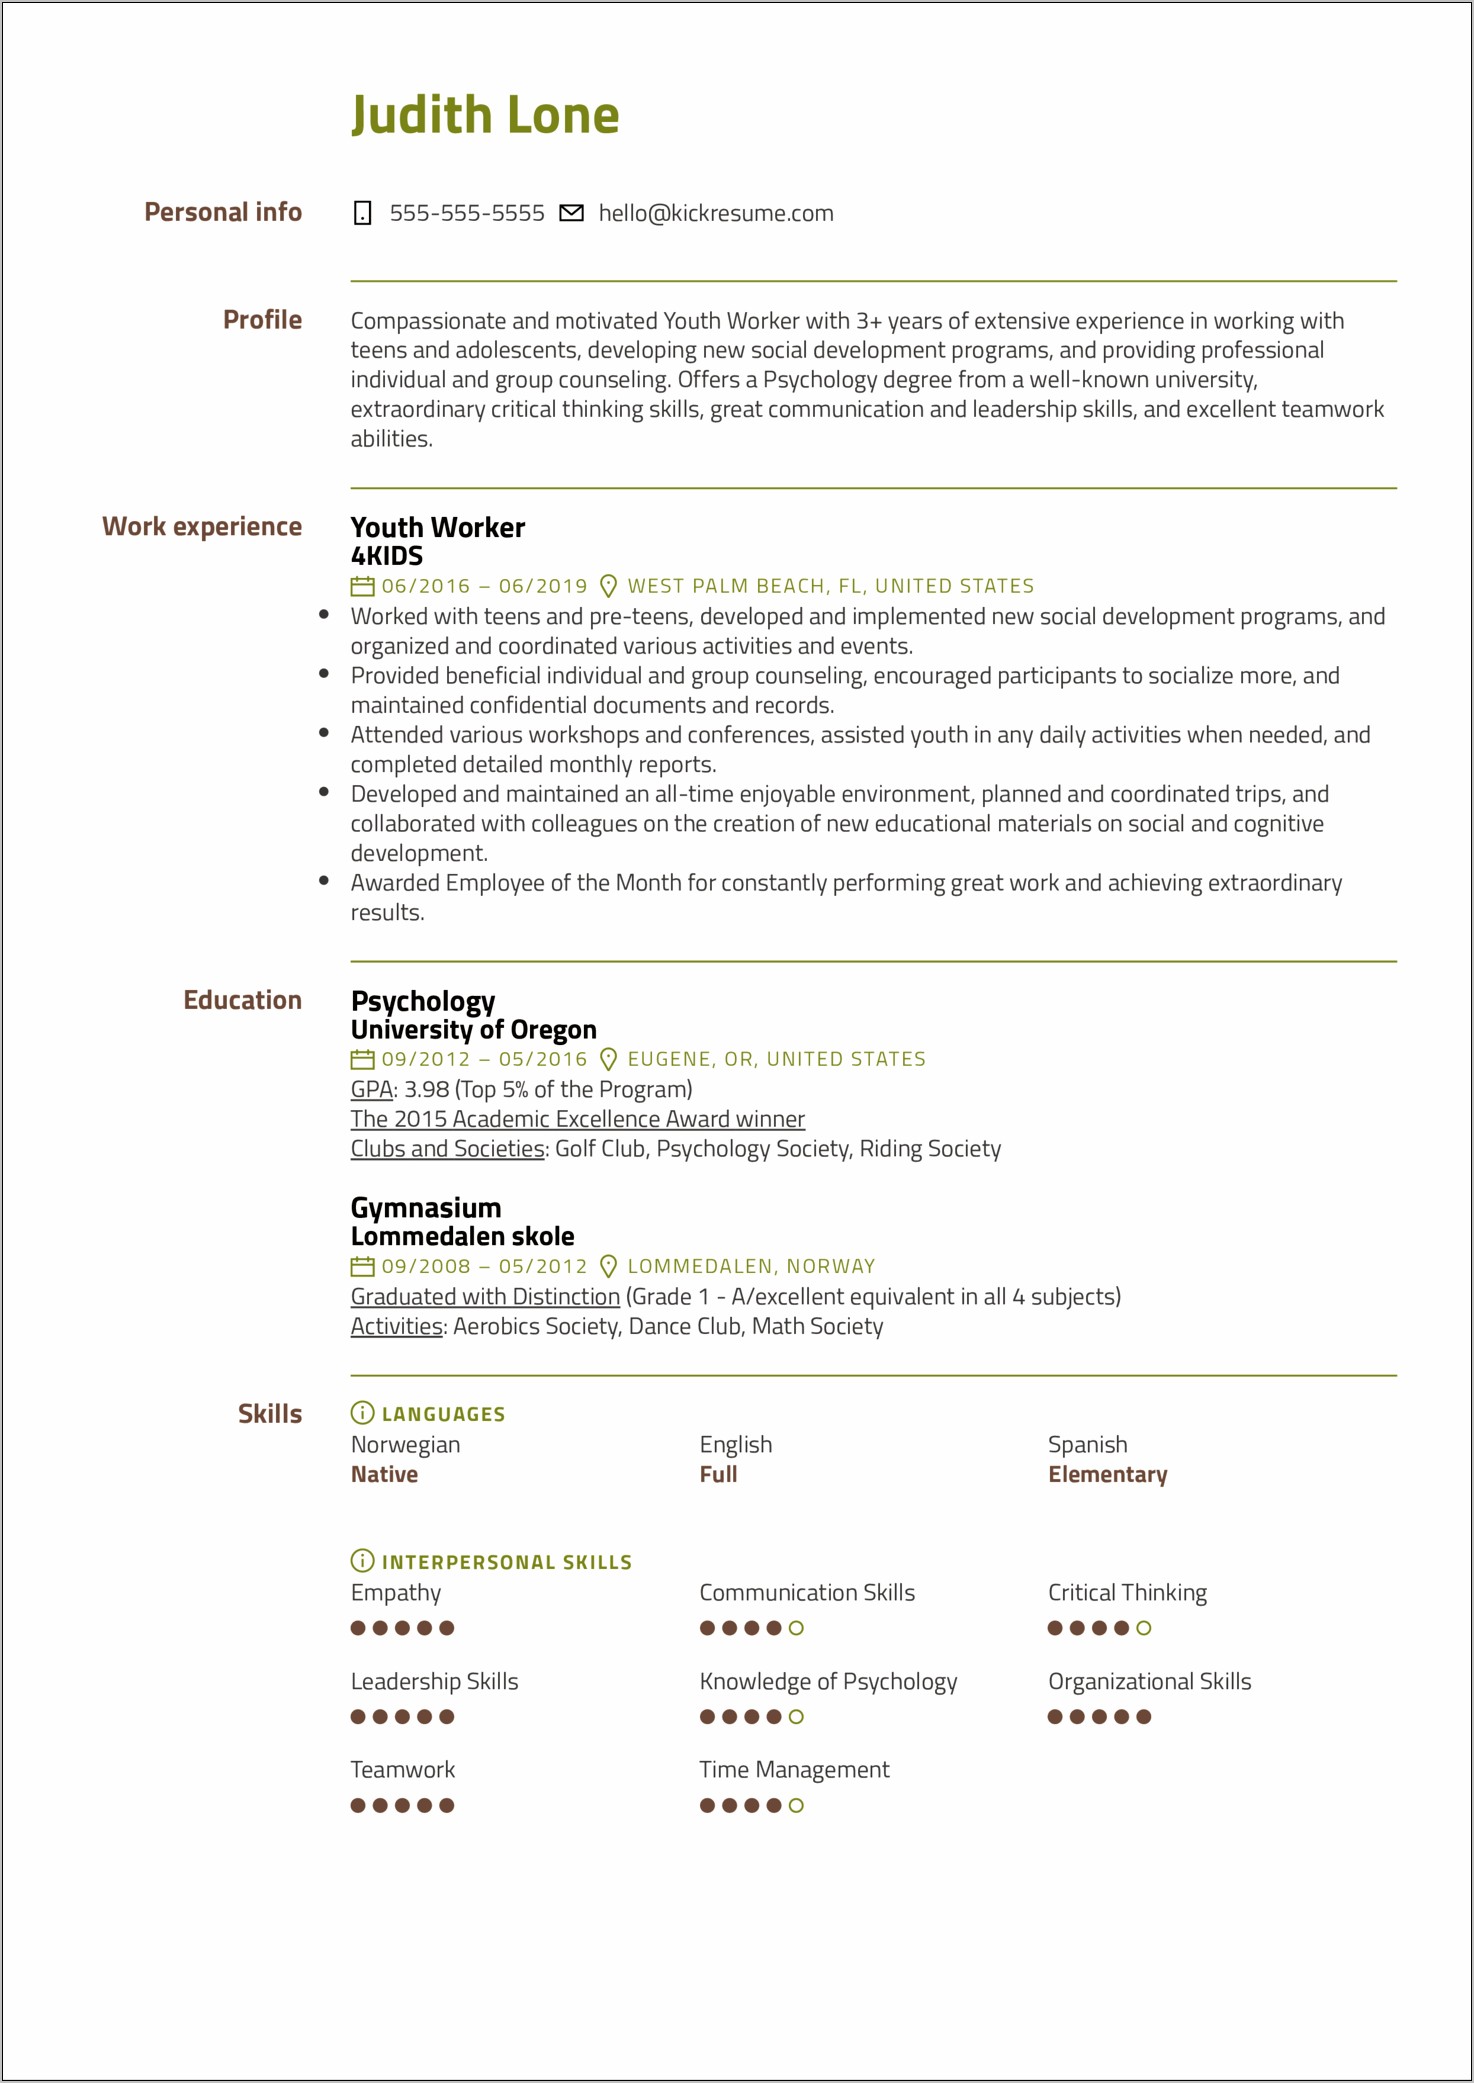 A Professional Youth Worker Resume Profile